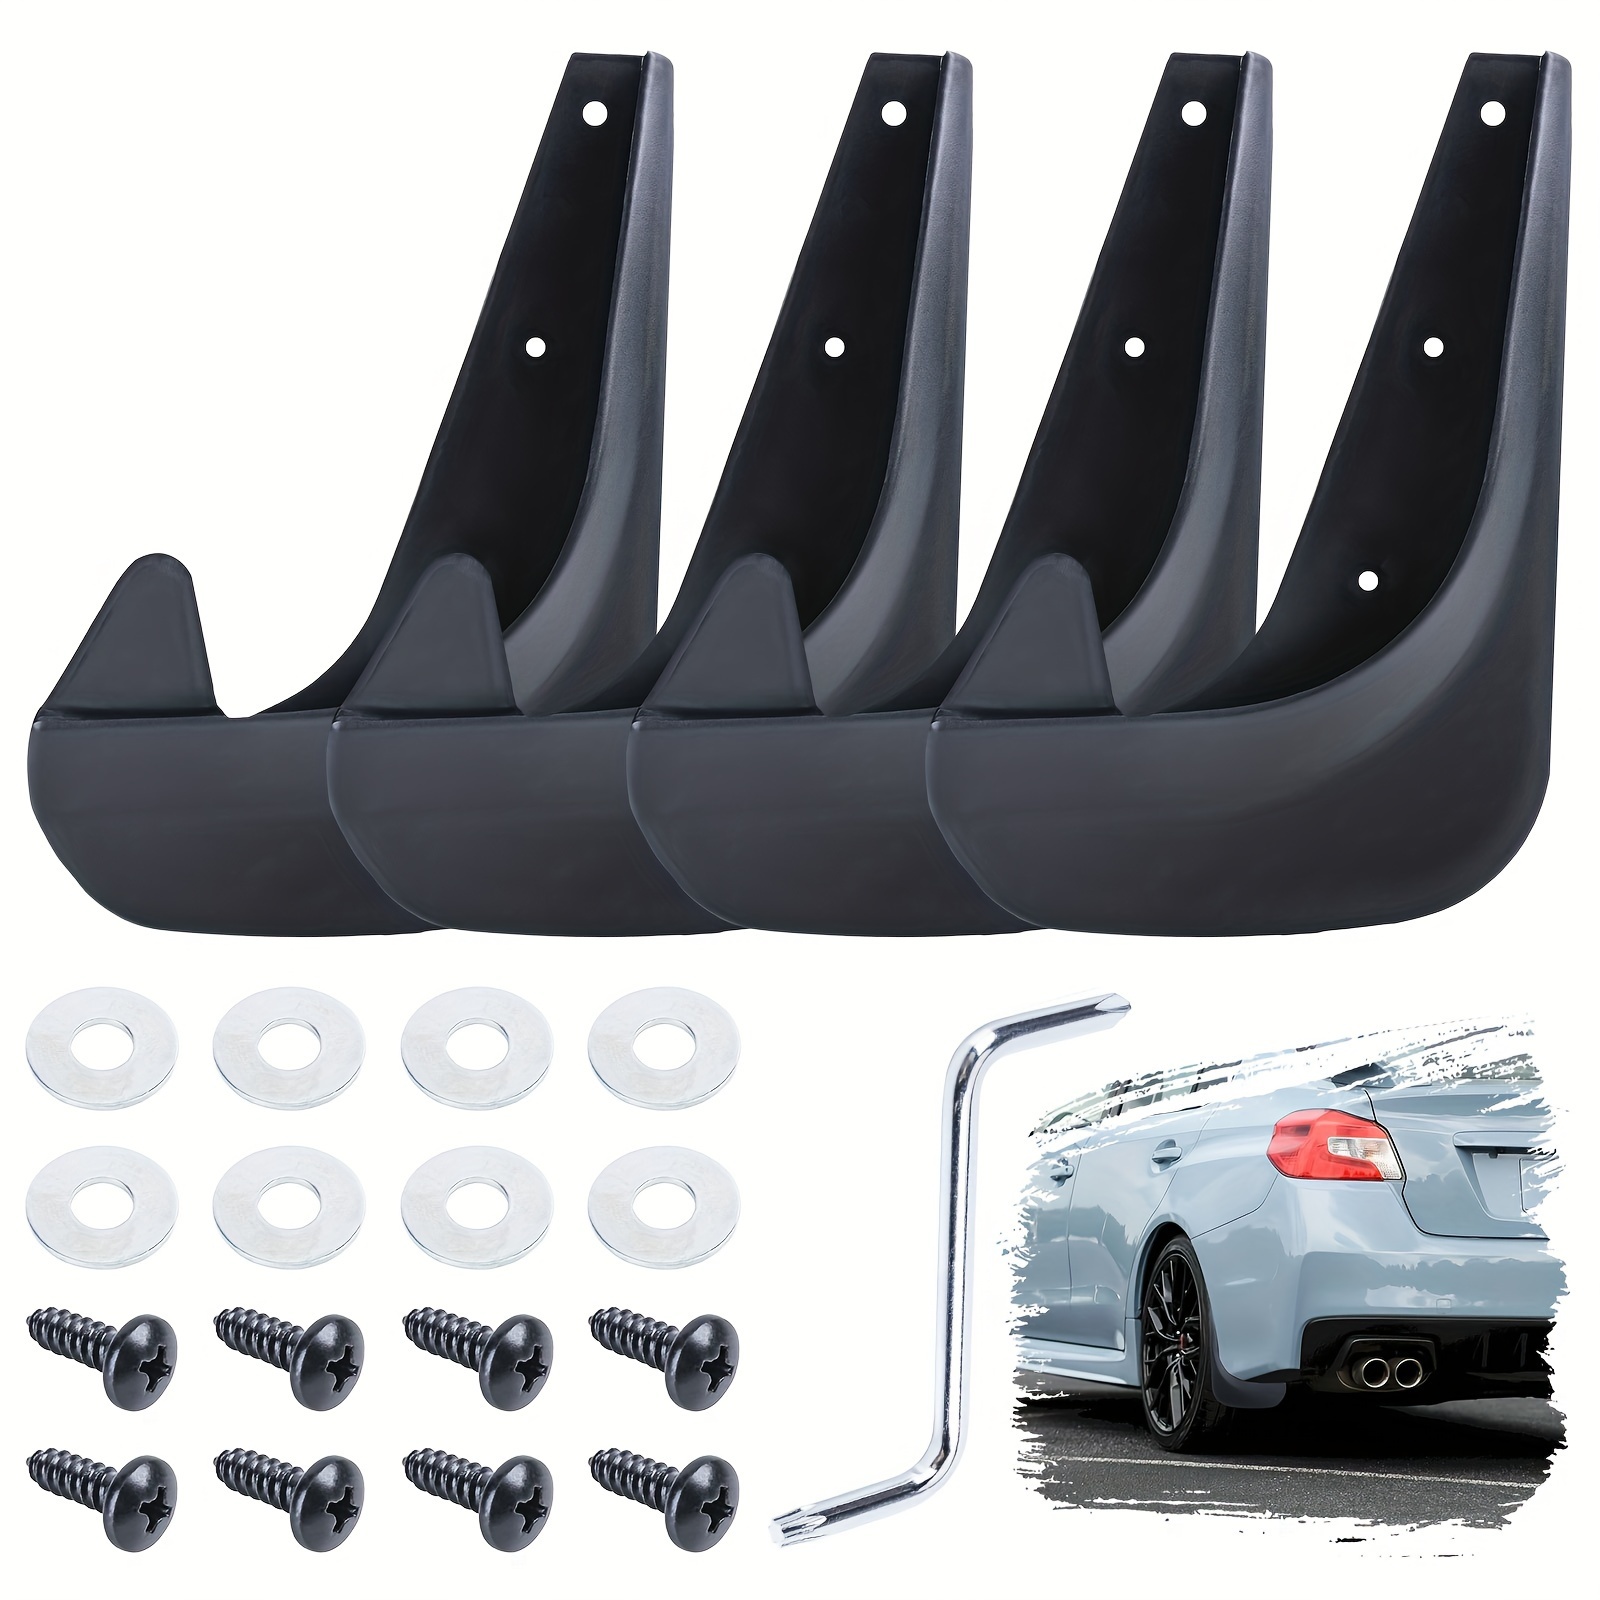 

4pcs Mud Flaps For Car Front & Rear Wheel, Flexible Fender Flares Protects Car Body, Universal Automotive Exterior Accessories Wheel Flares Splash Guard Fits Car Truck Suv